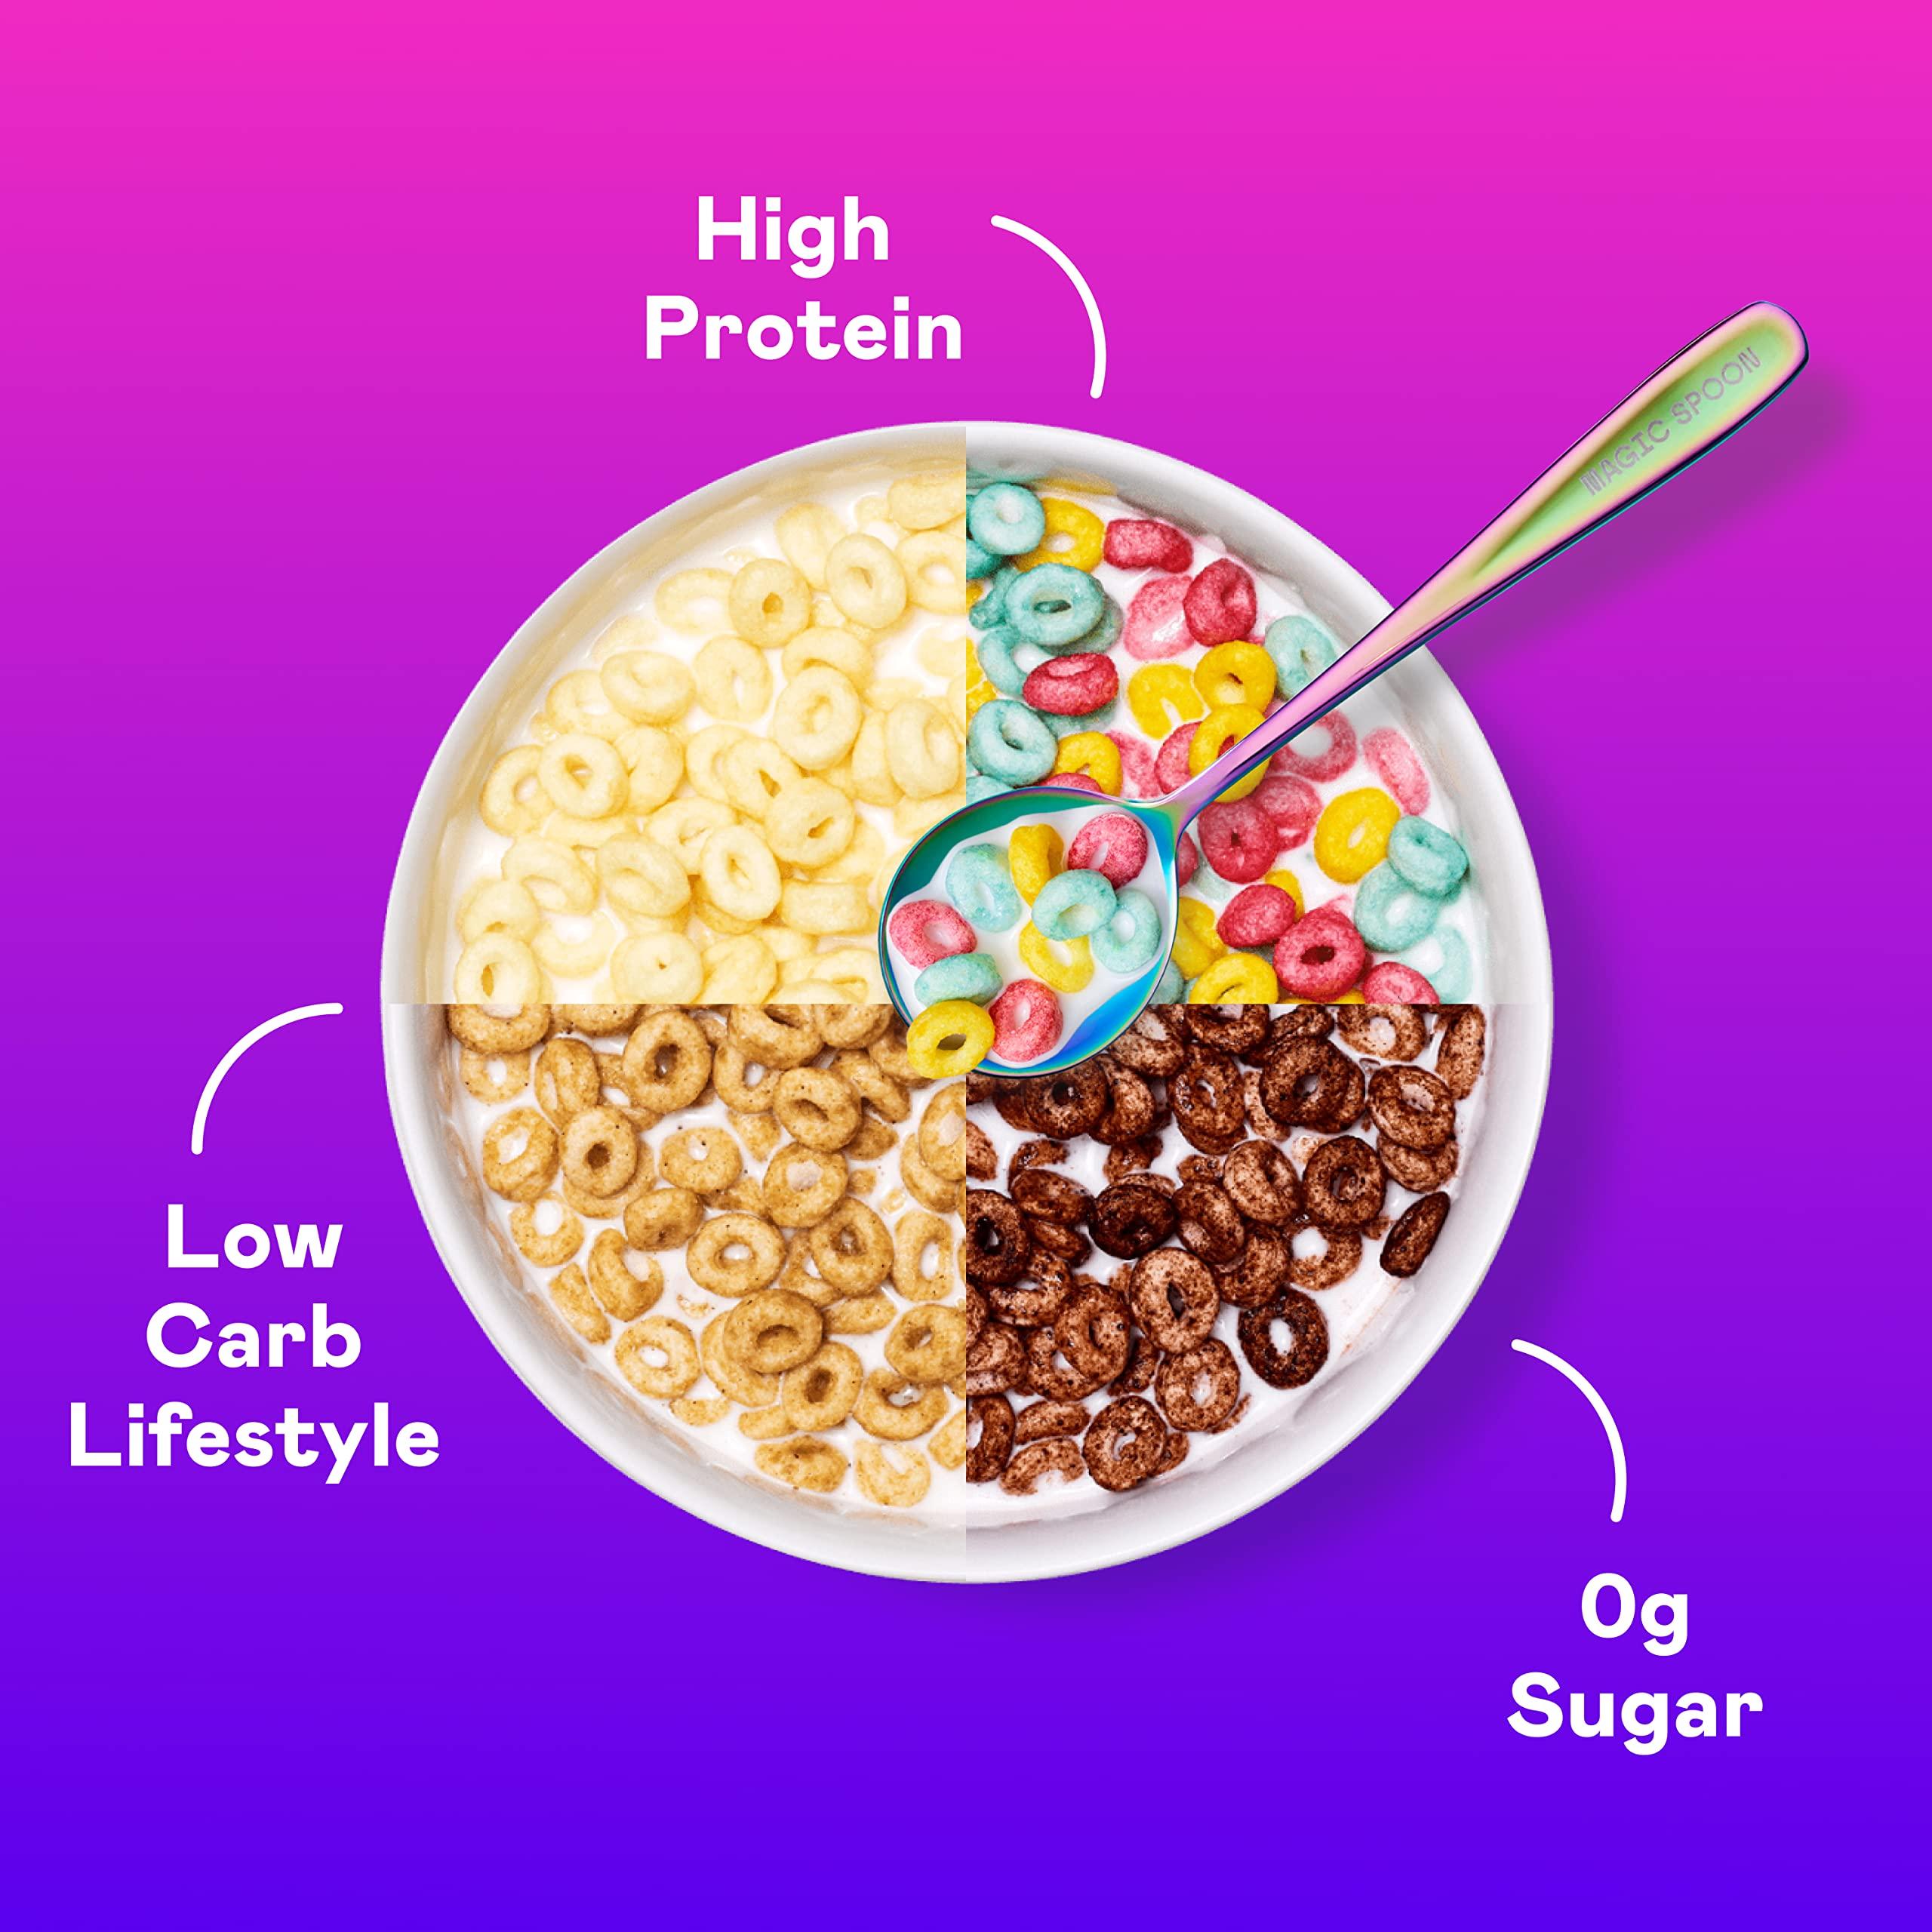 Magic Spoon Cereal, Variety 4-Pack of Cereal - Keto &amp; Low Carb Lifestyles I Gluten &amp; Grain Free I High Protein I 0g Sugar